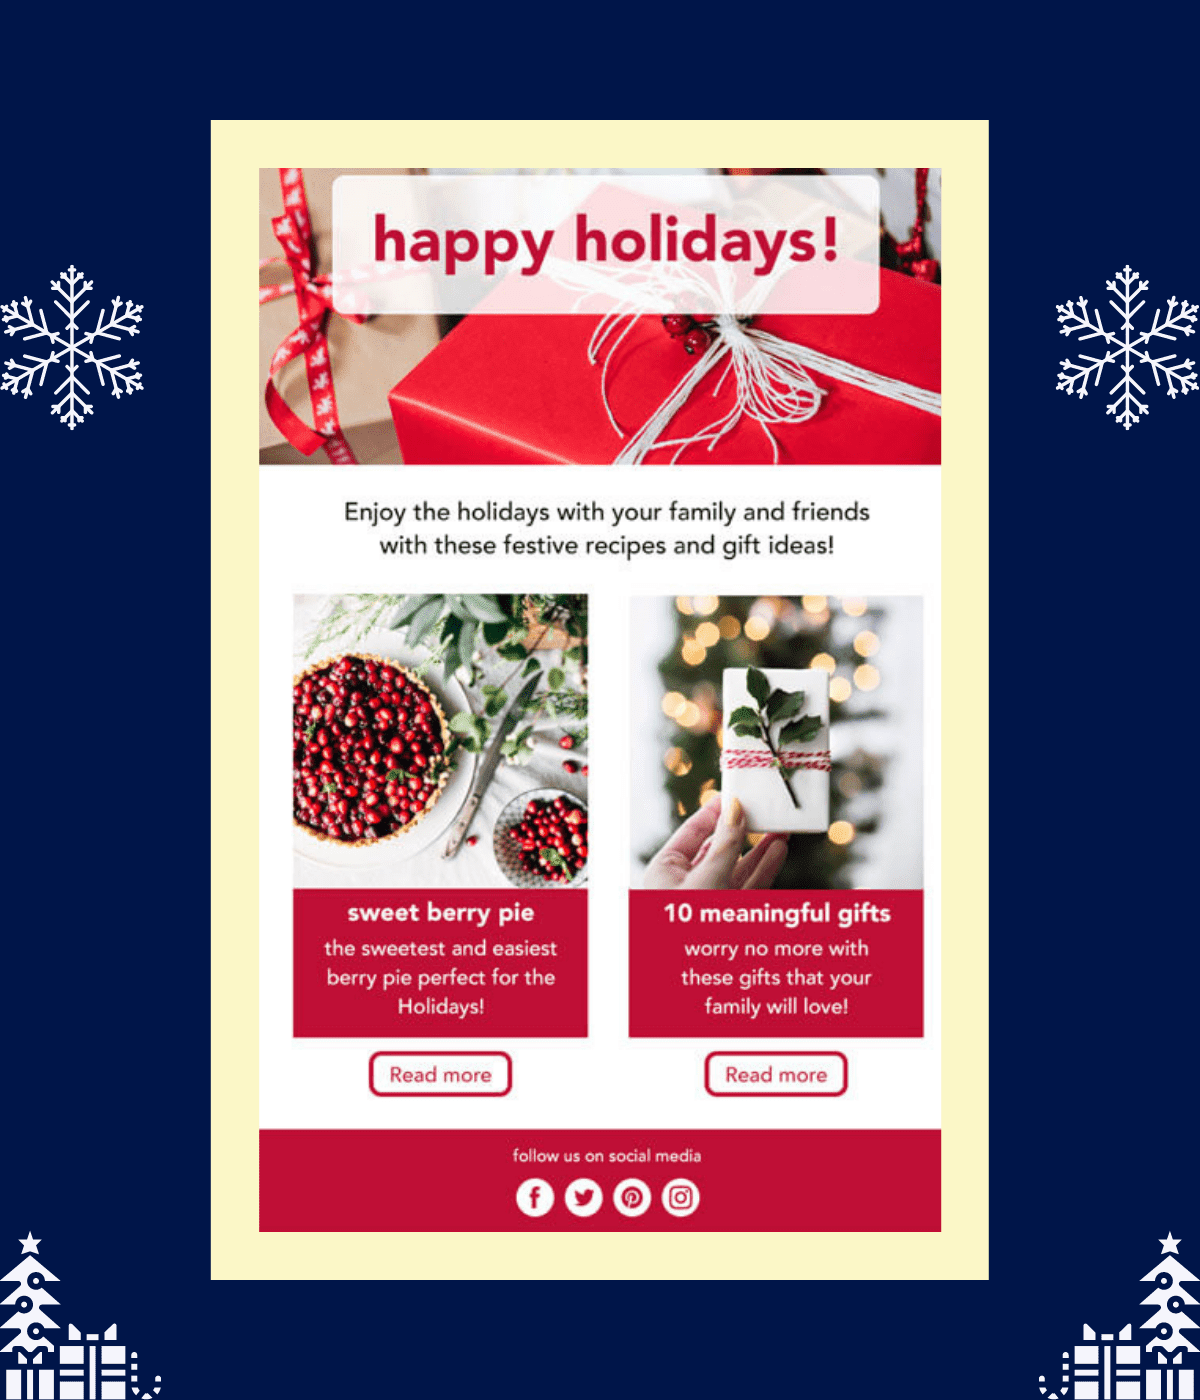 Email Marketing Campaigns to Drive Sales this Holiday Season